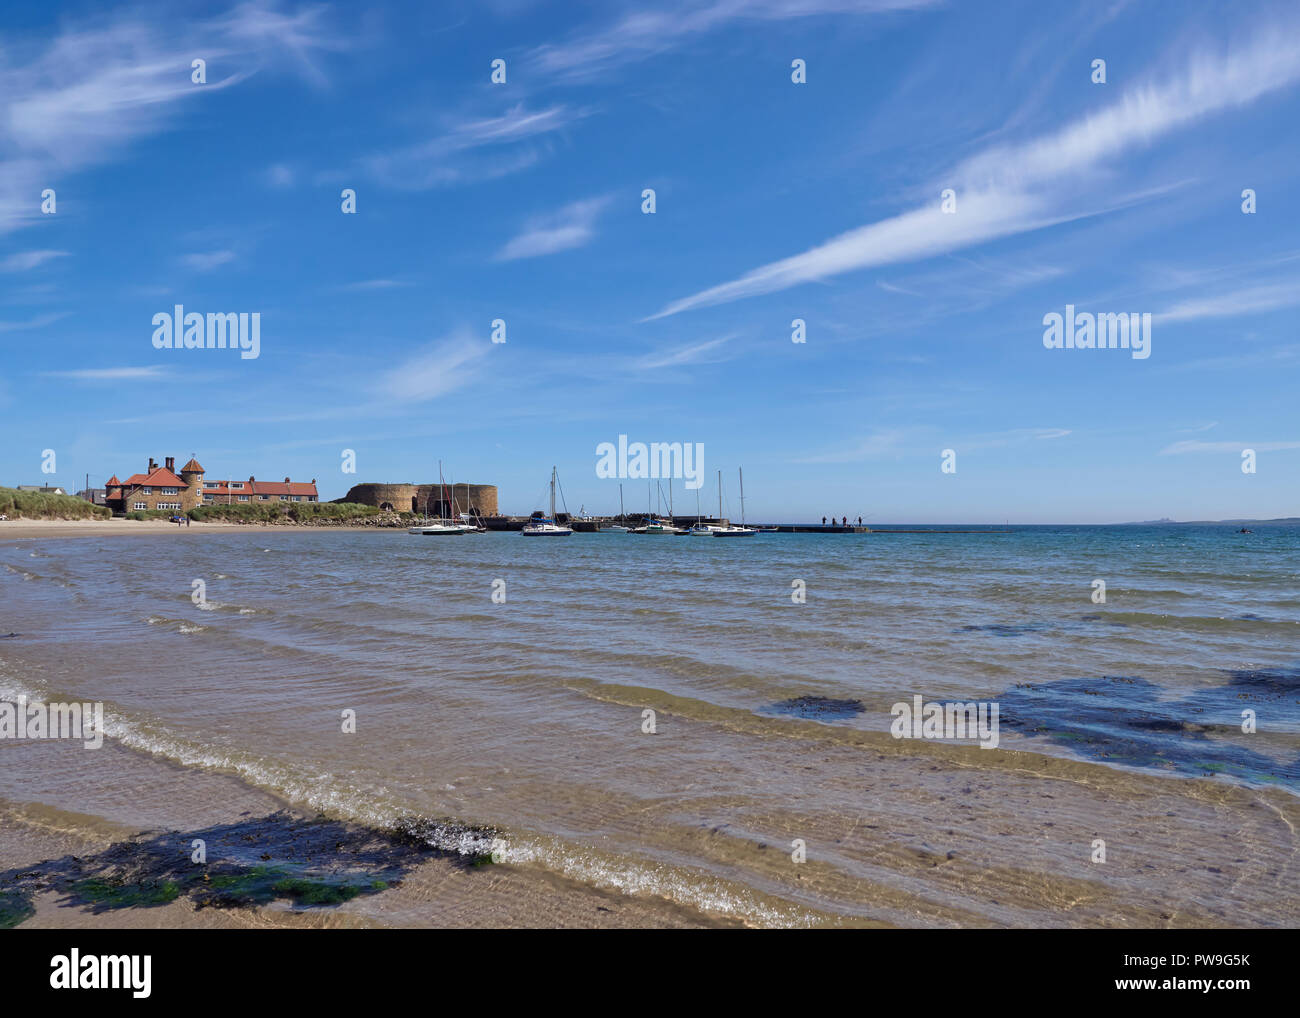 A Landscape photo of Beadnell Bay and Beach looking towards the Harbour and Old Lime Kilns in Northumberland, England, UK. Stock Photo